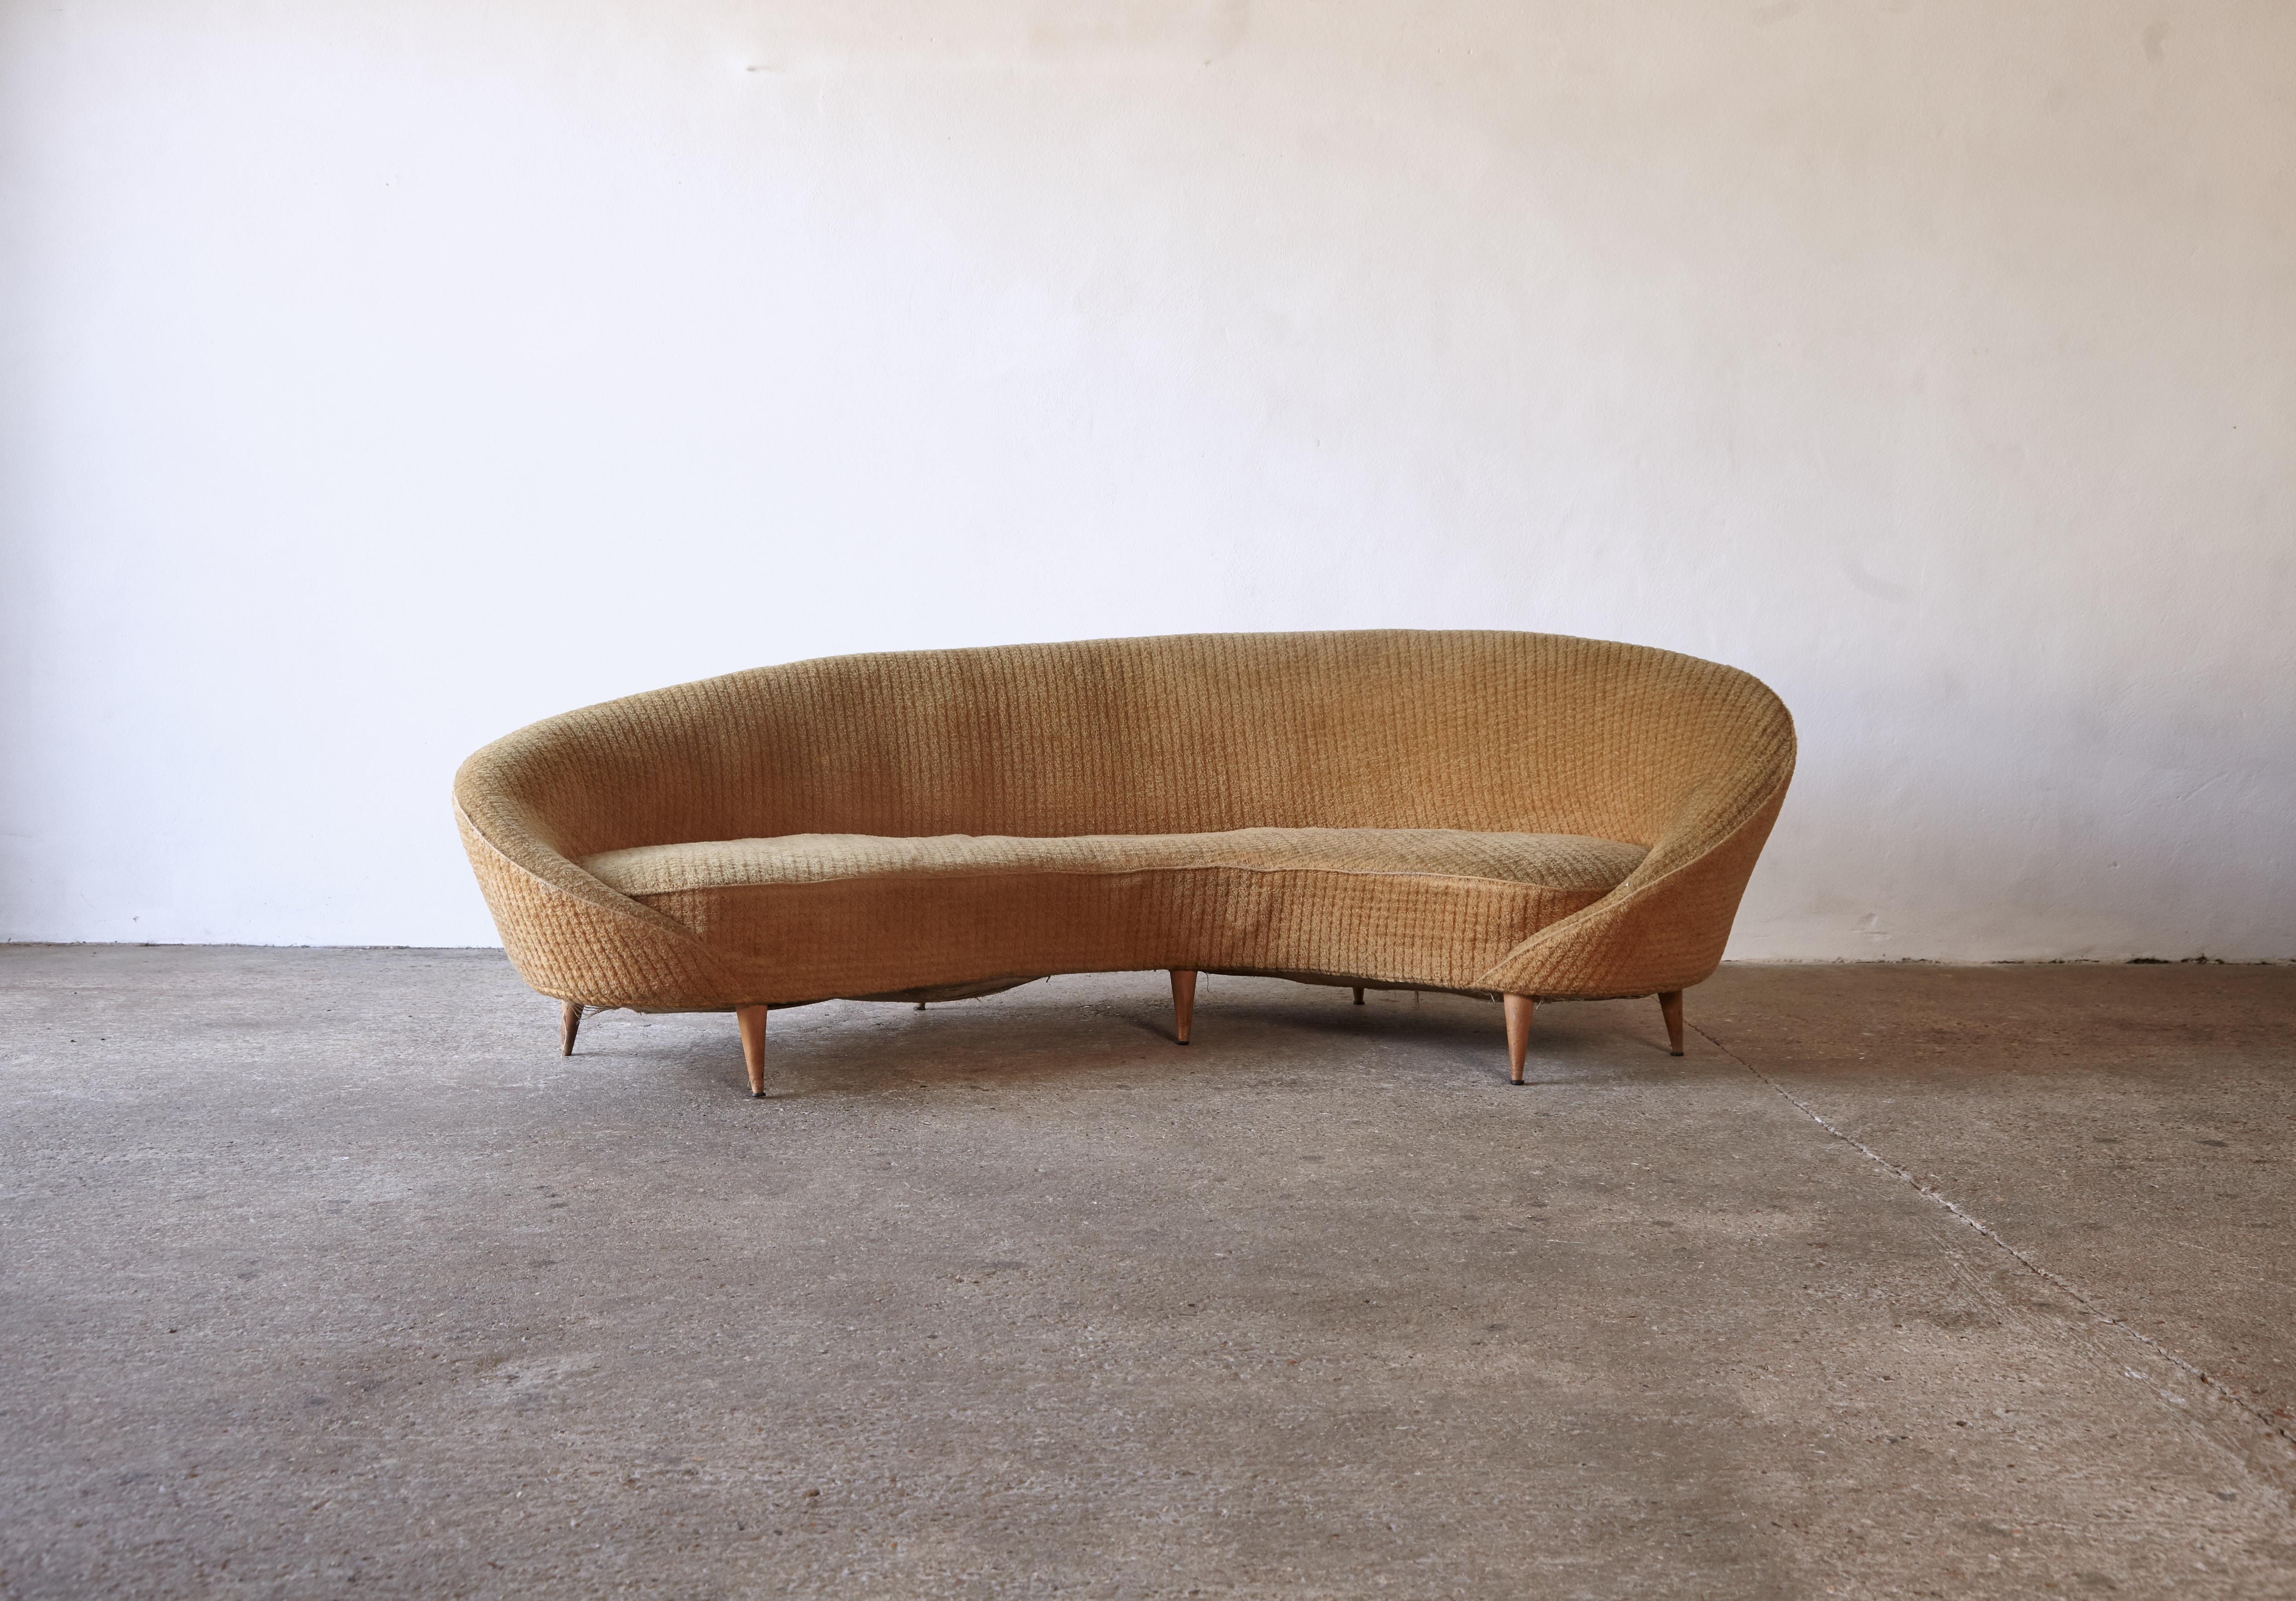 An original and authentic Italian 1950s curved comma sofa, attributed to Ico Parisi (also sometimes attributed to Federico Munari). The sofa is of curved organic form with its original sprung cushion and conical beech feet. We are offering this sofa